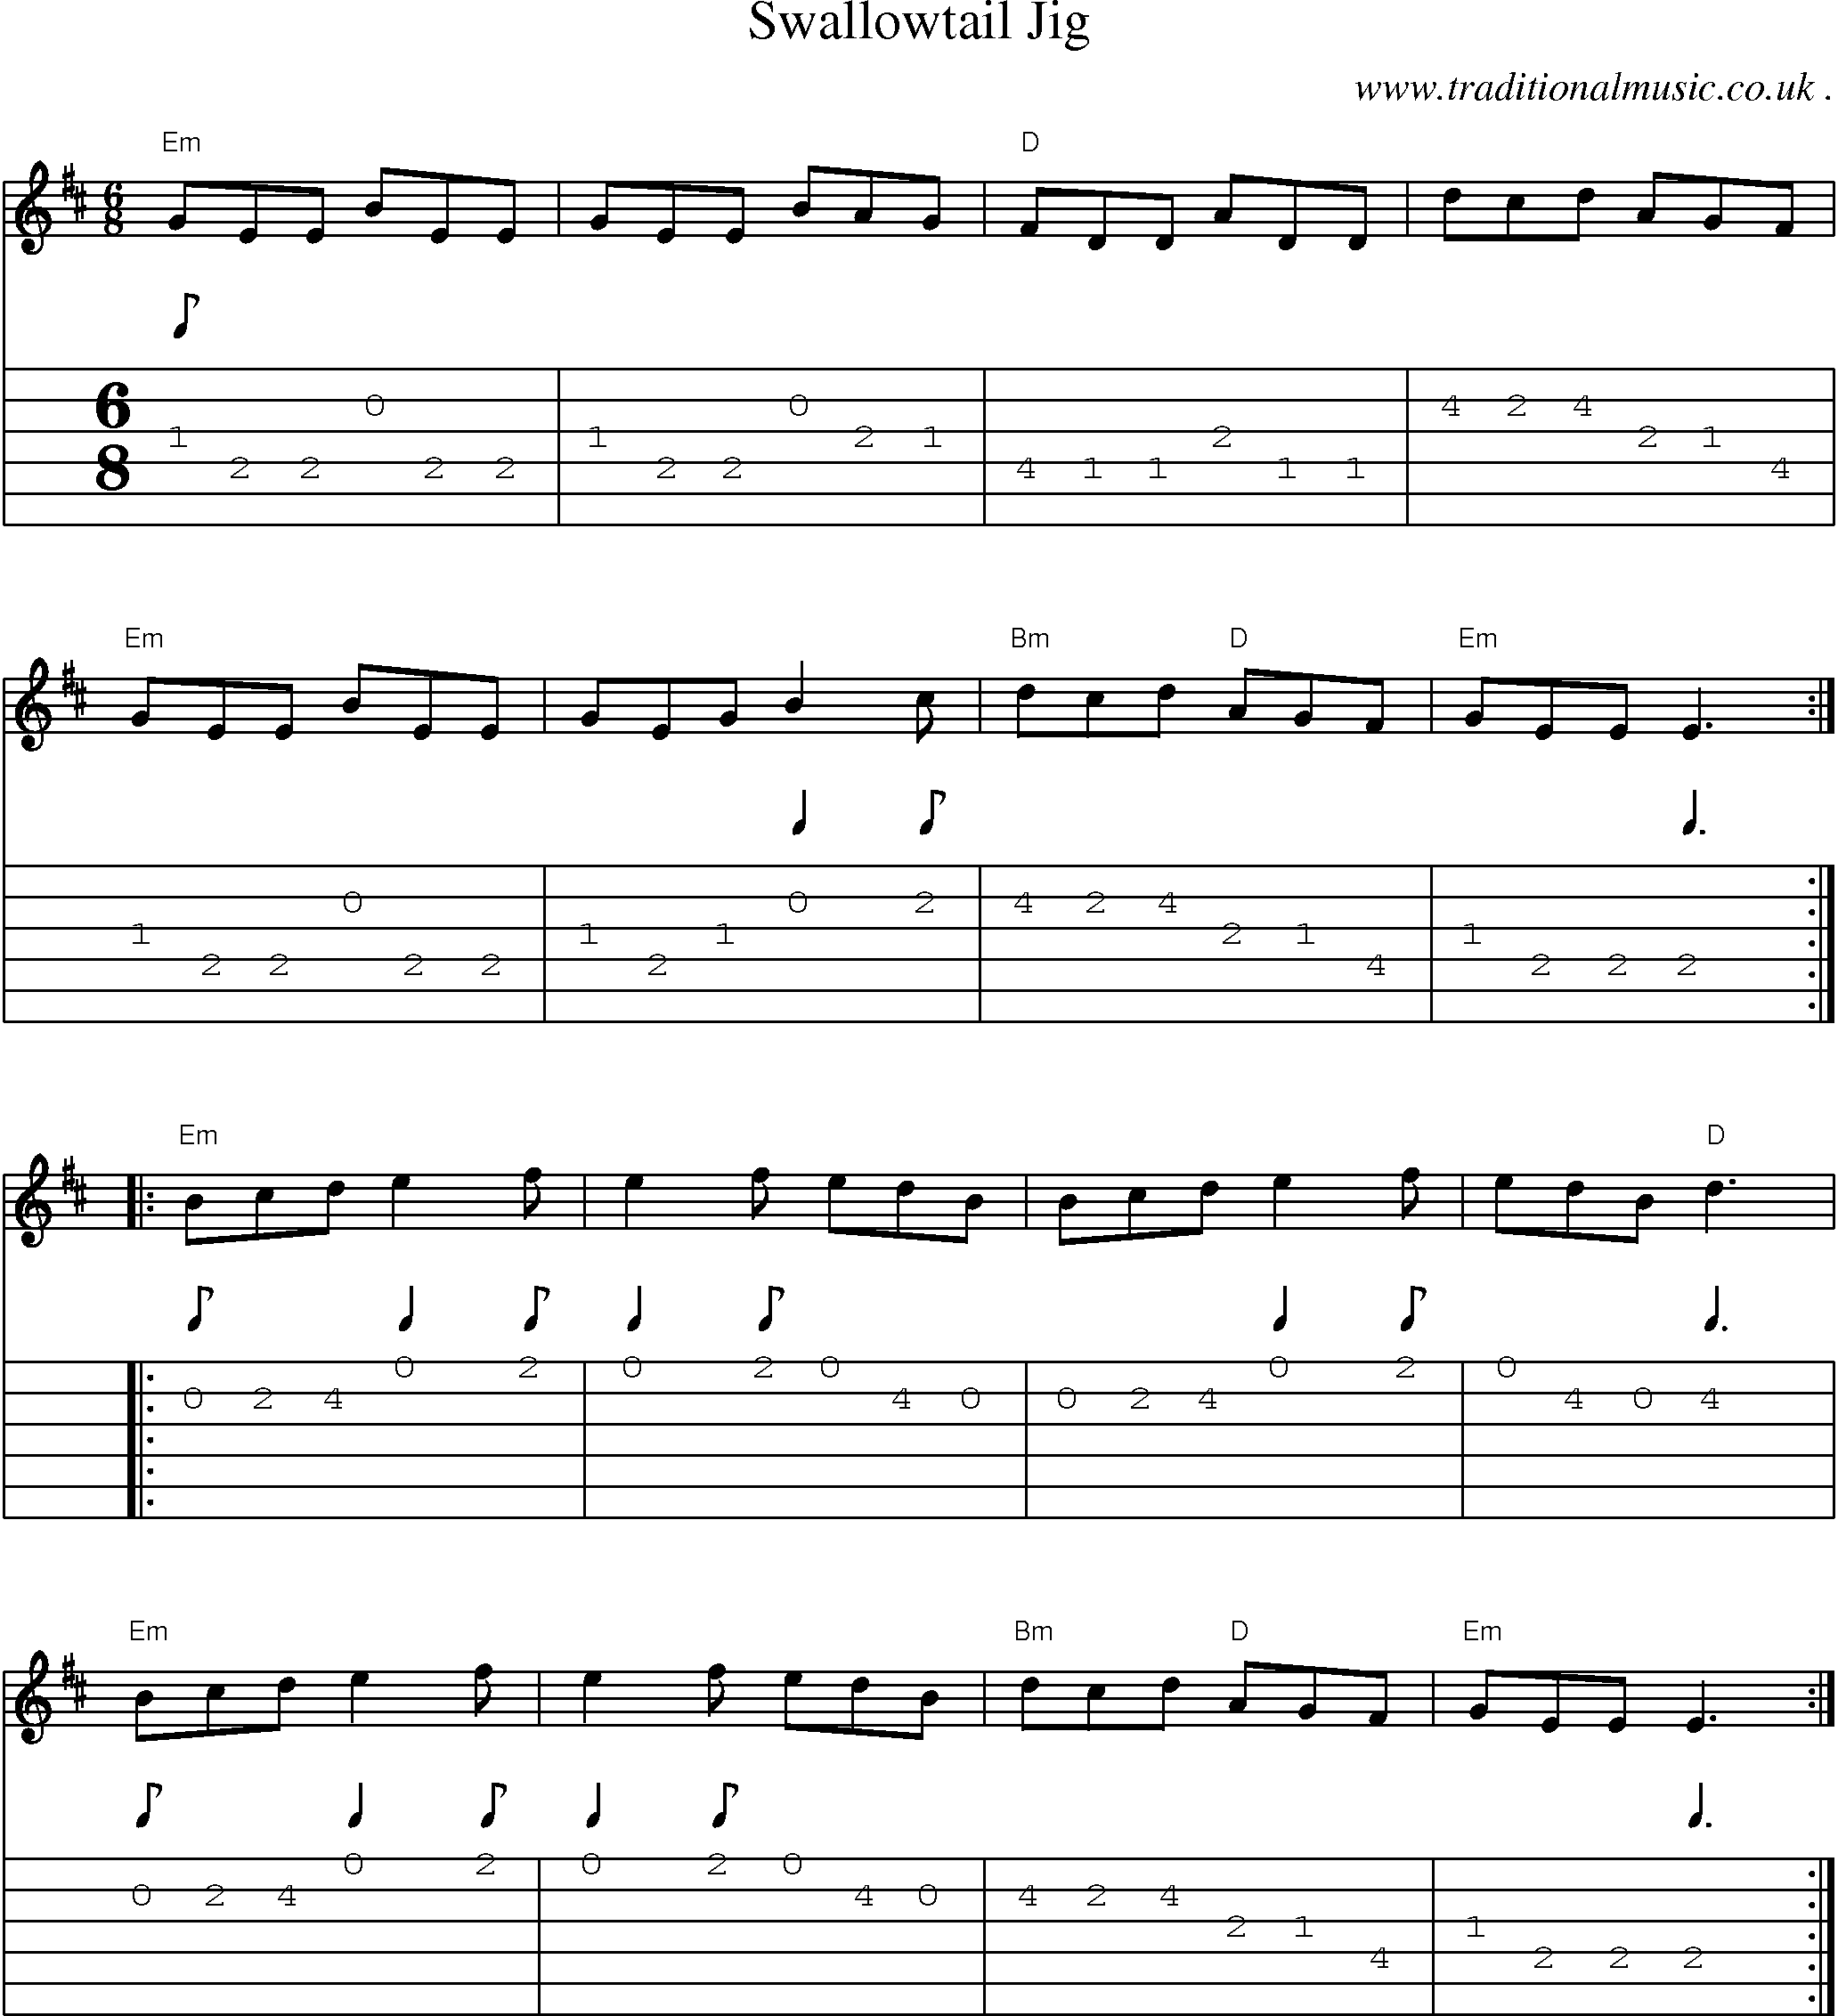 Music Score and Guitar Tabs for Swallowtail Jig